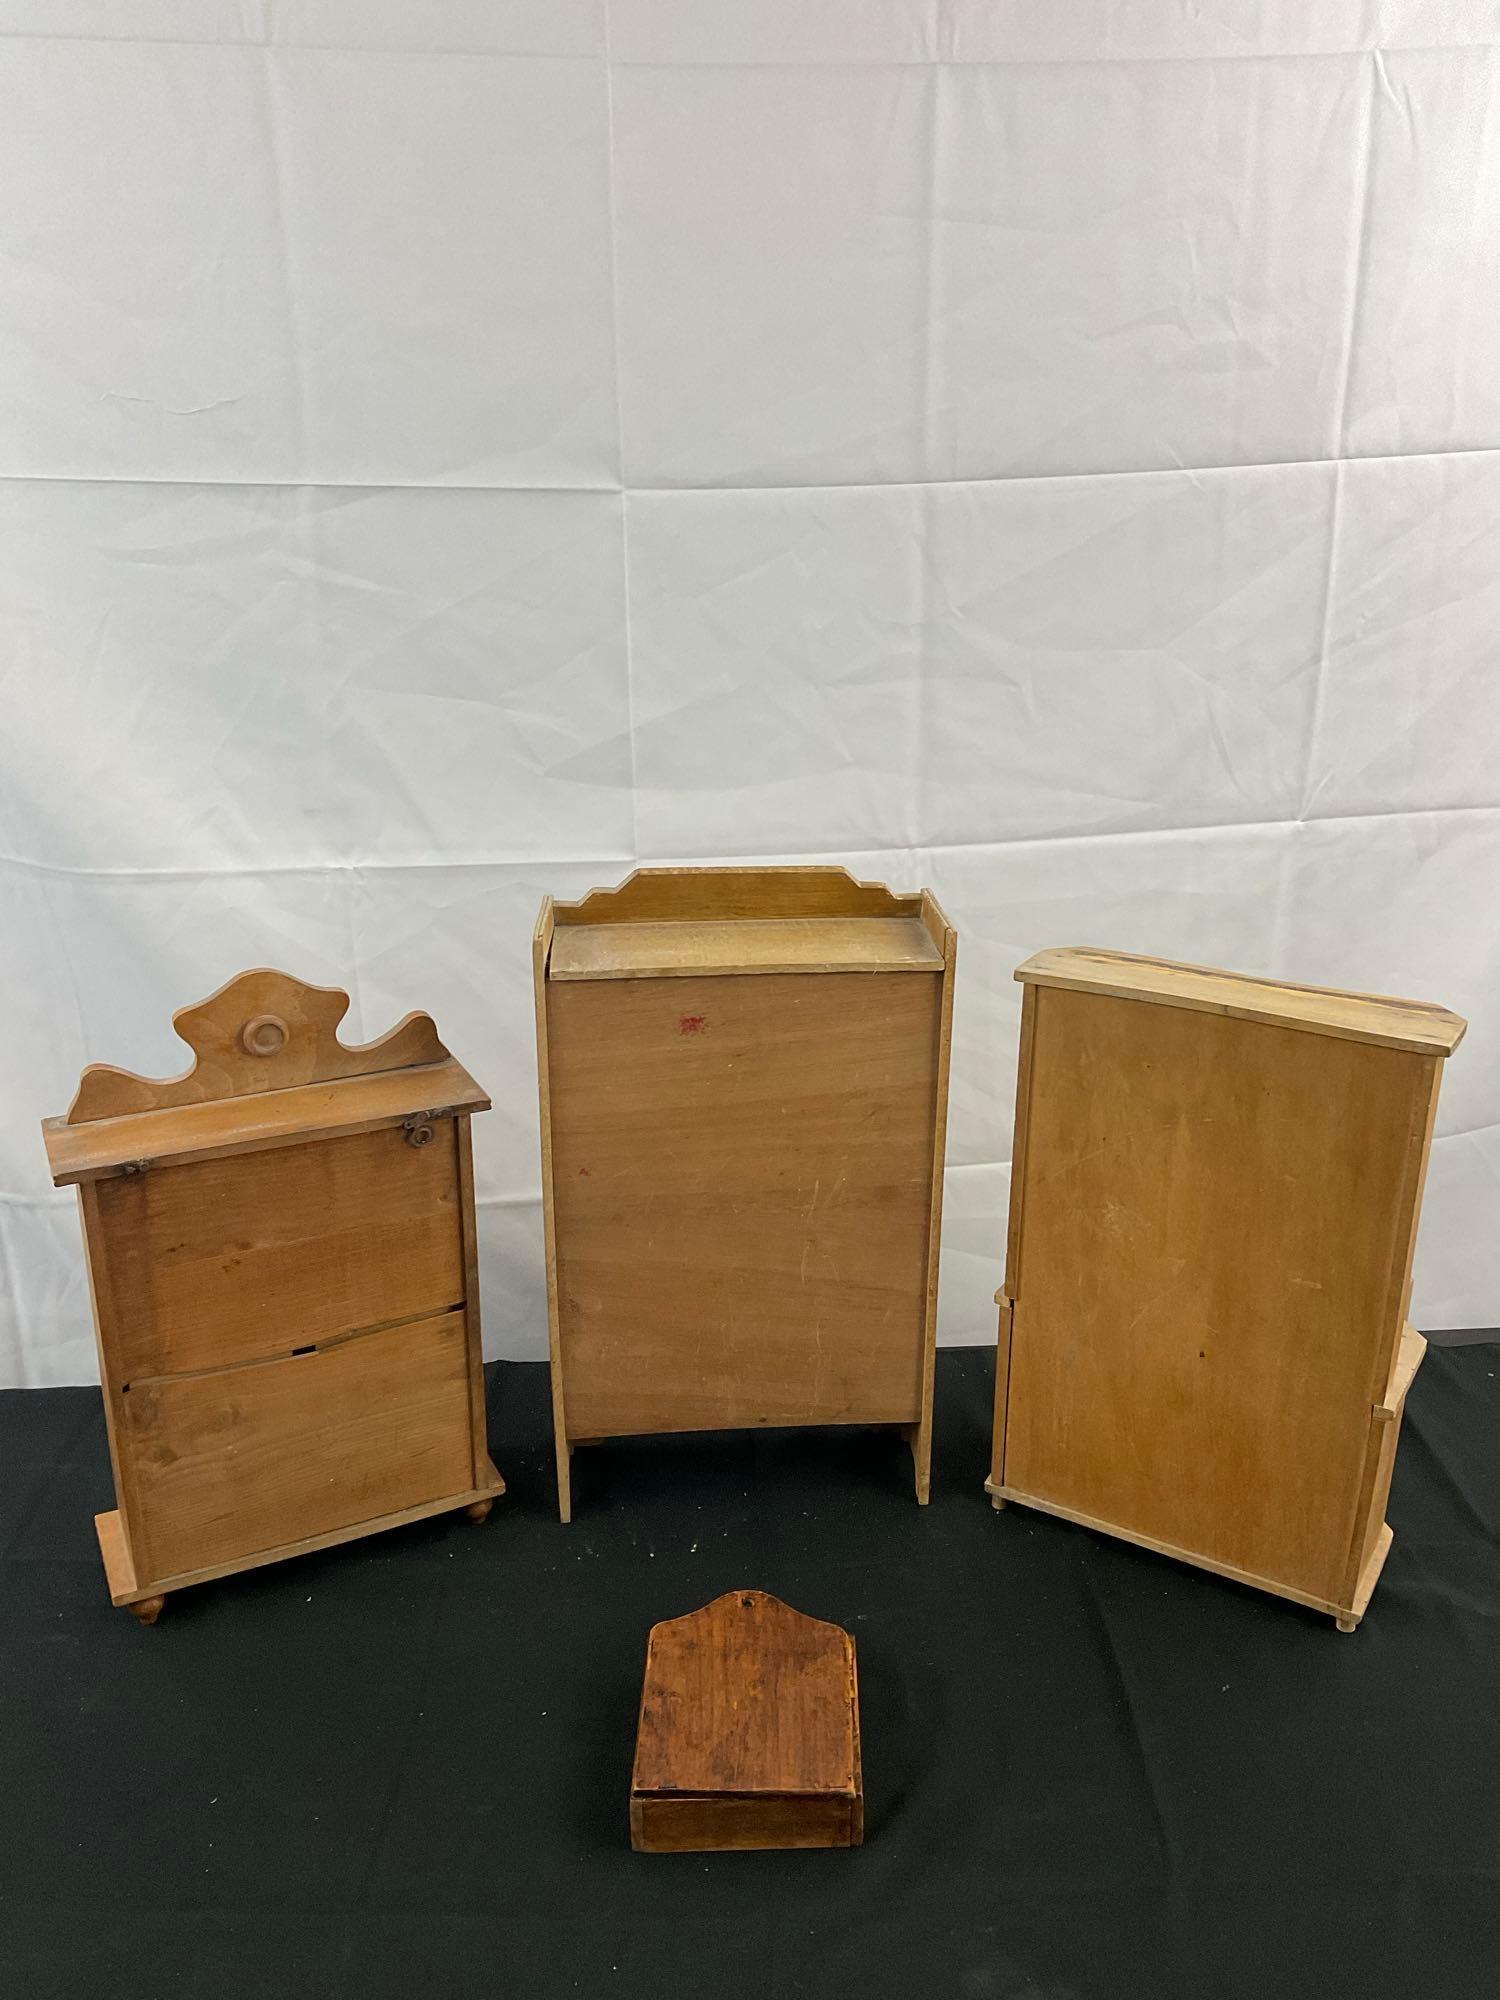 4 pcs Vintage Handmade Wooden Miniature Furniture Assortment. Spice Drawers. Armoire. See pics.